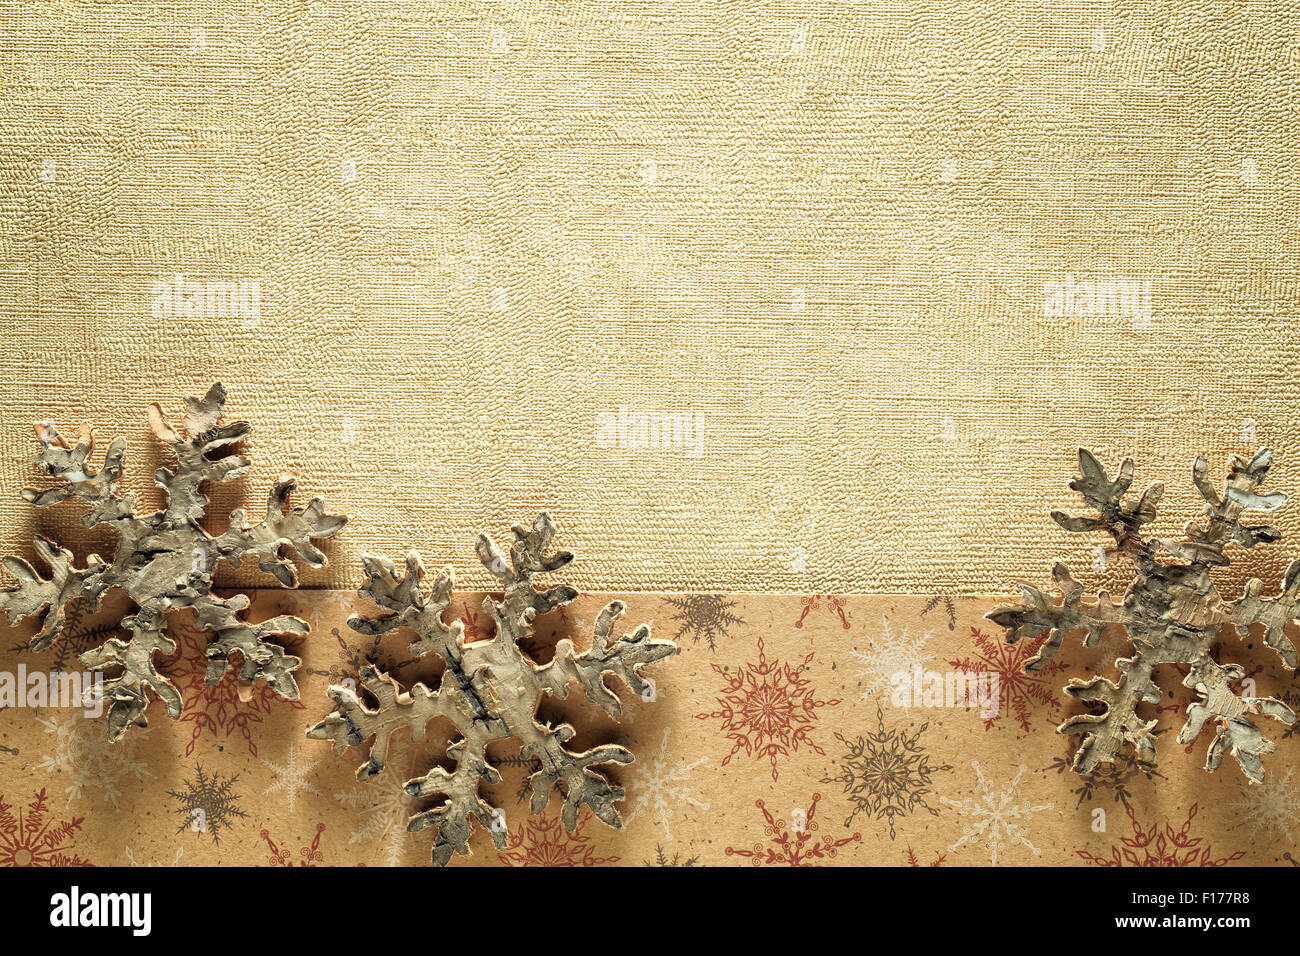 Wooden snowflake on golden paper textured background Stock Photo